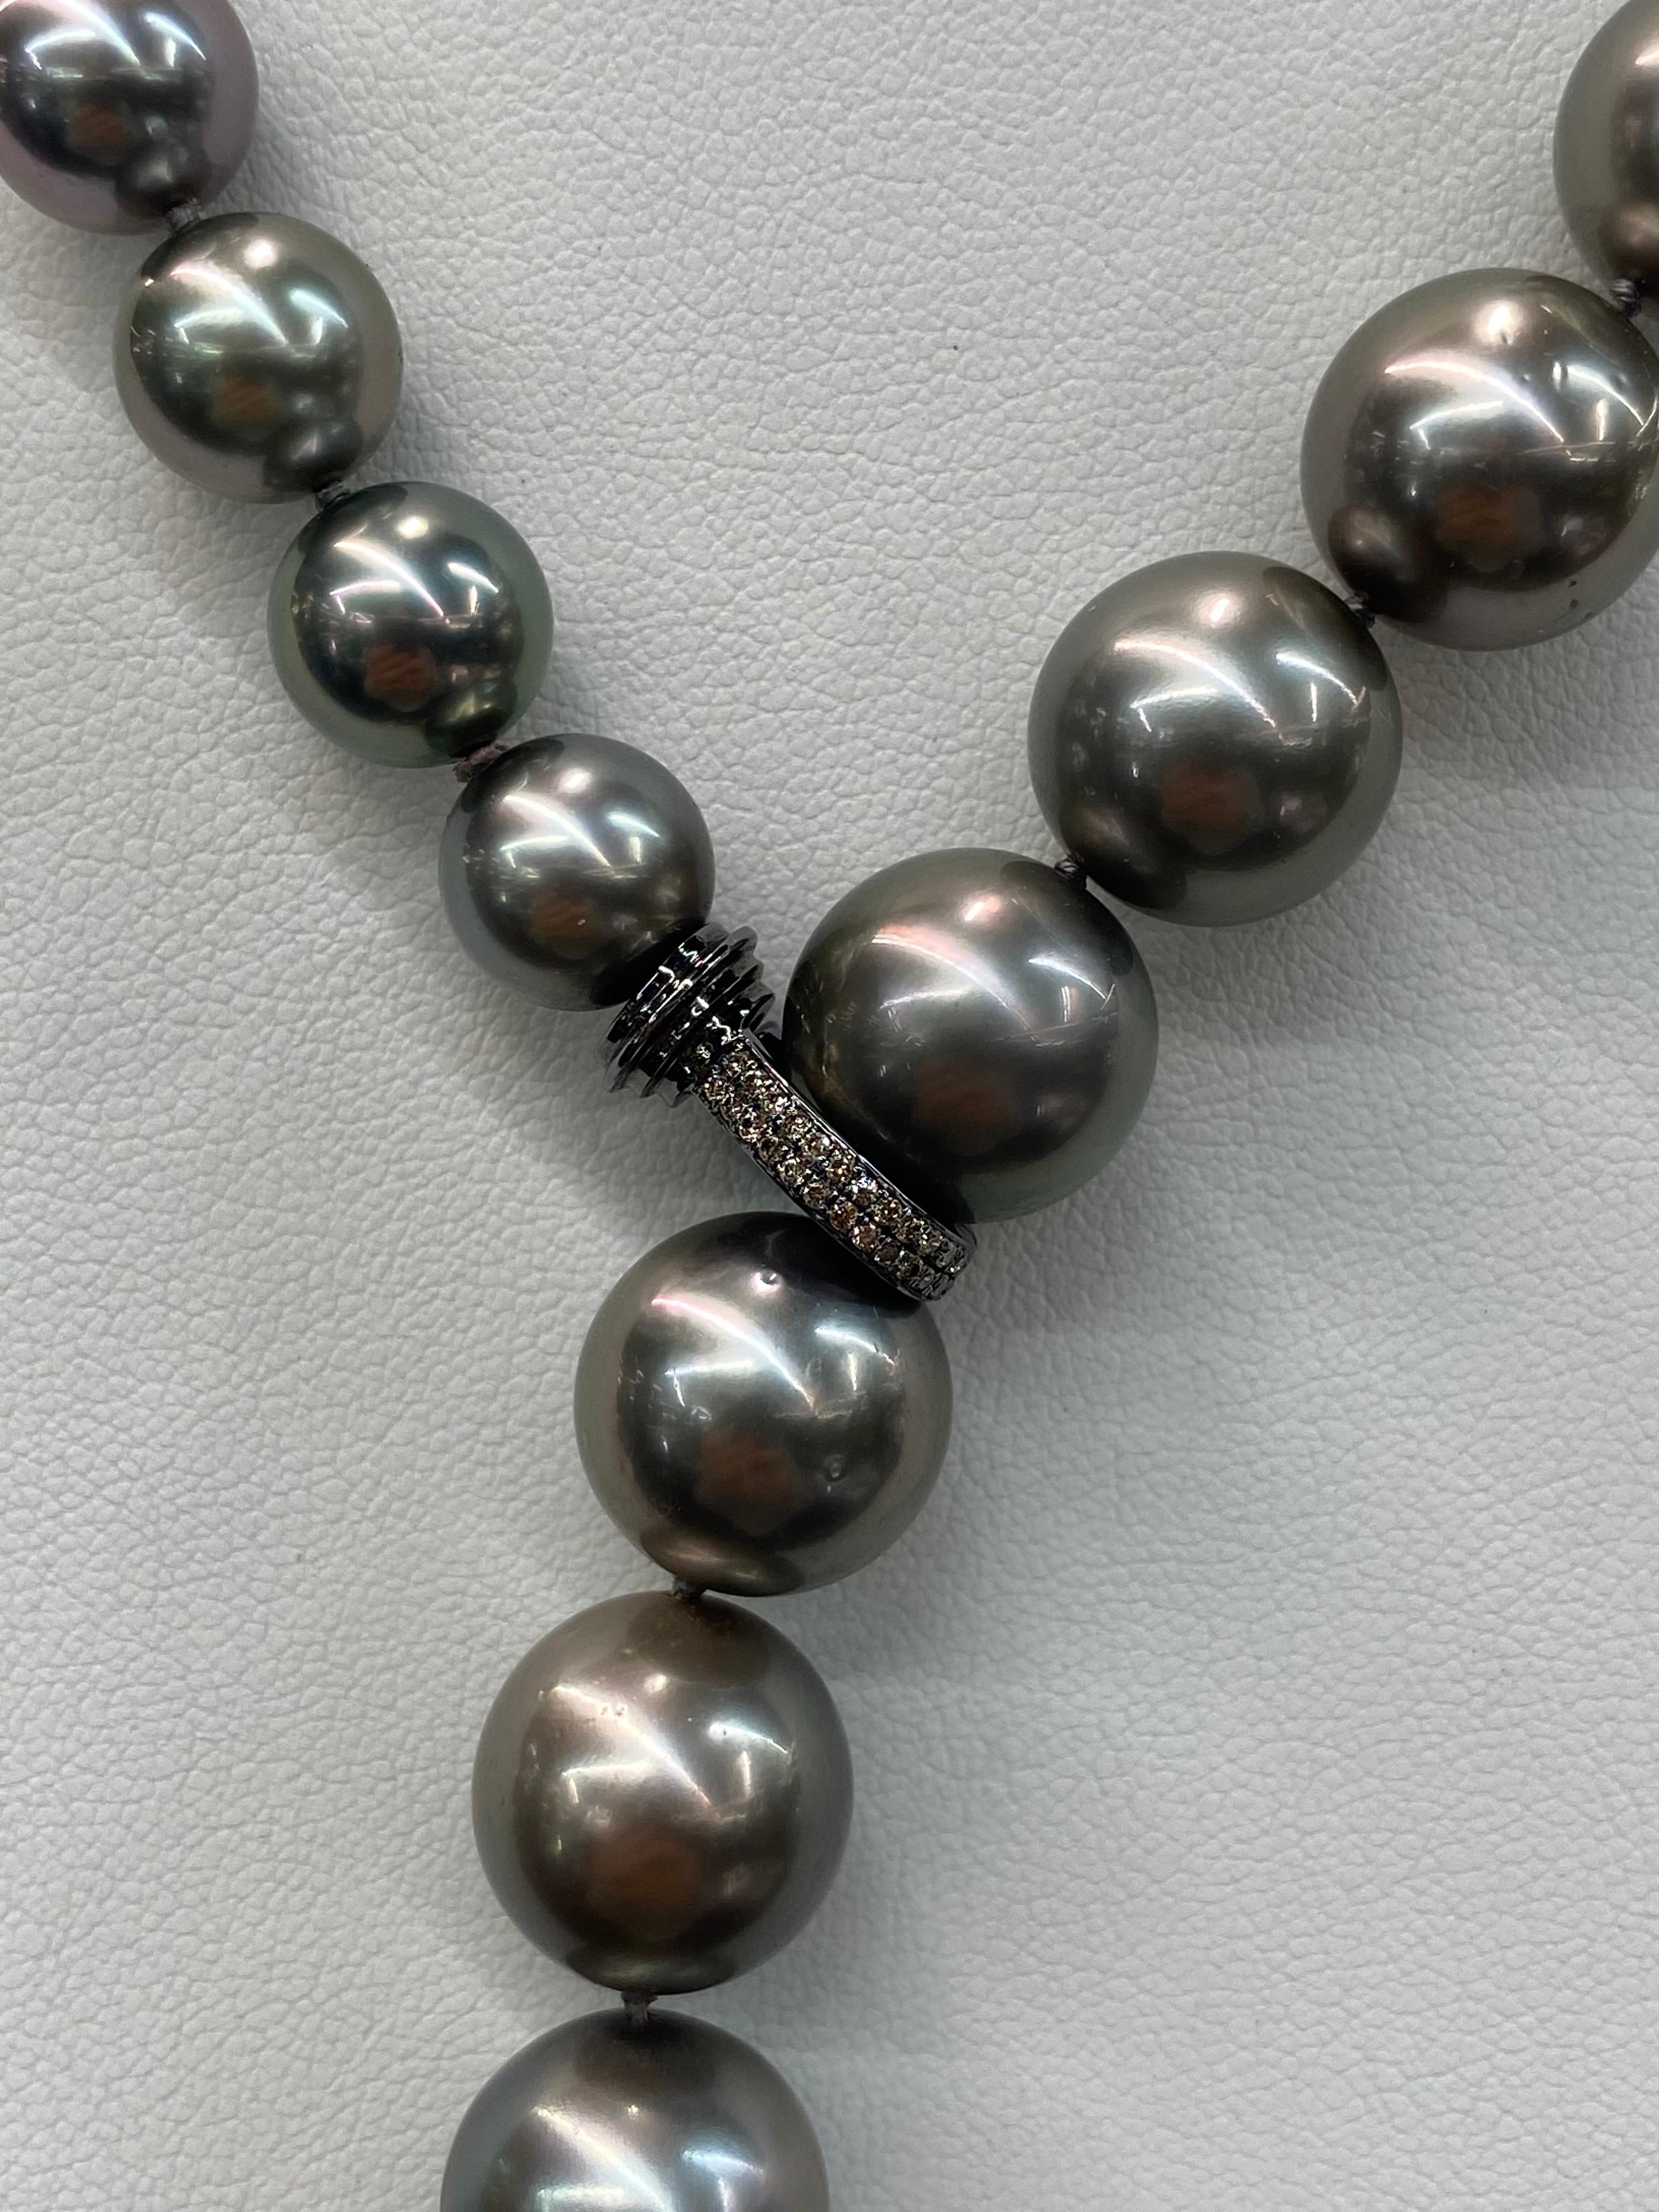 Chic Tahitian Pearl necklace featuring 47 pearls measuring 9.9-14 mm and a diamond front clasp. 
Pearl quality: AAA
Pearl Luster: AAA Excellent
Nacre : Very Thick

Strand can be made to order, shortened or longer. Clasp can be changed, Diamond